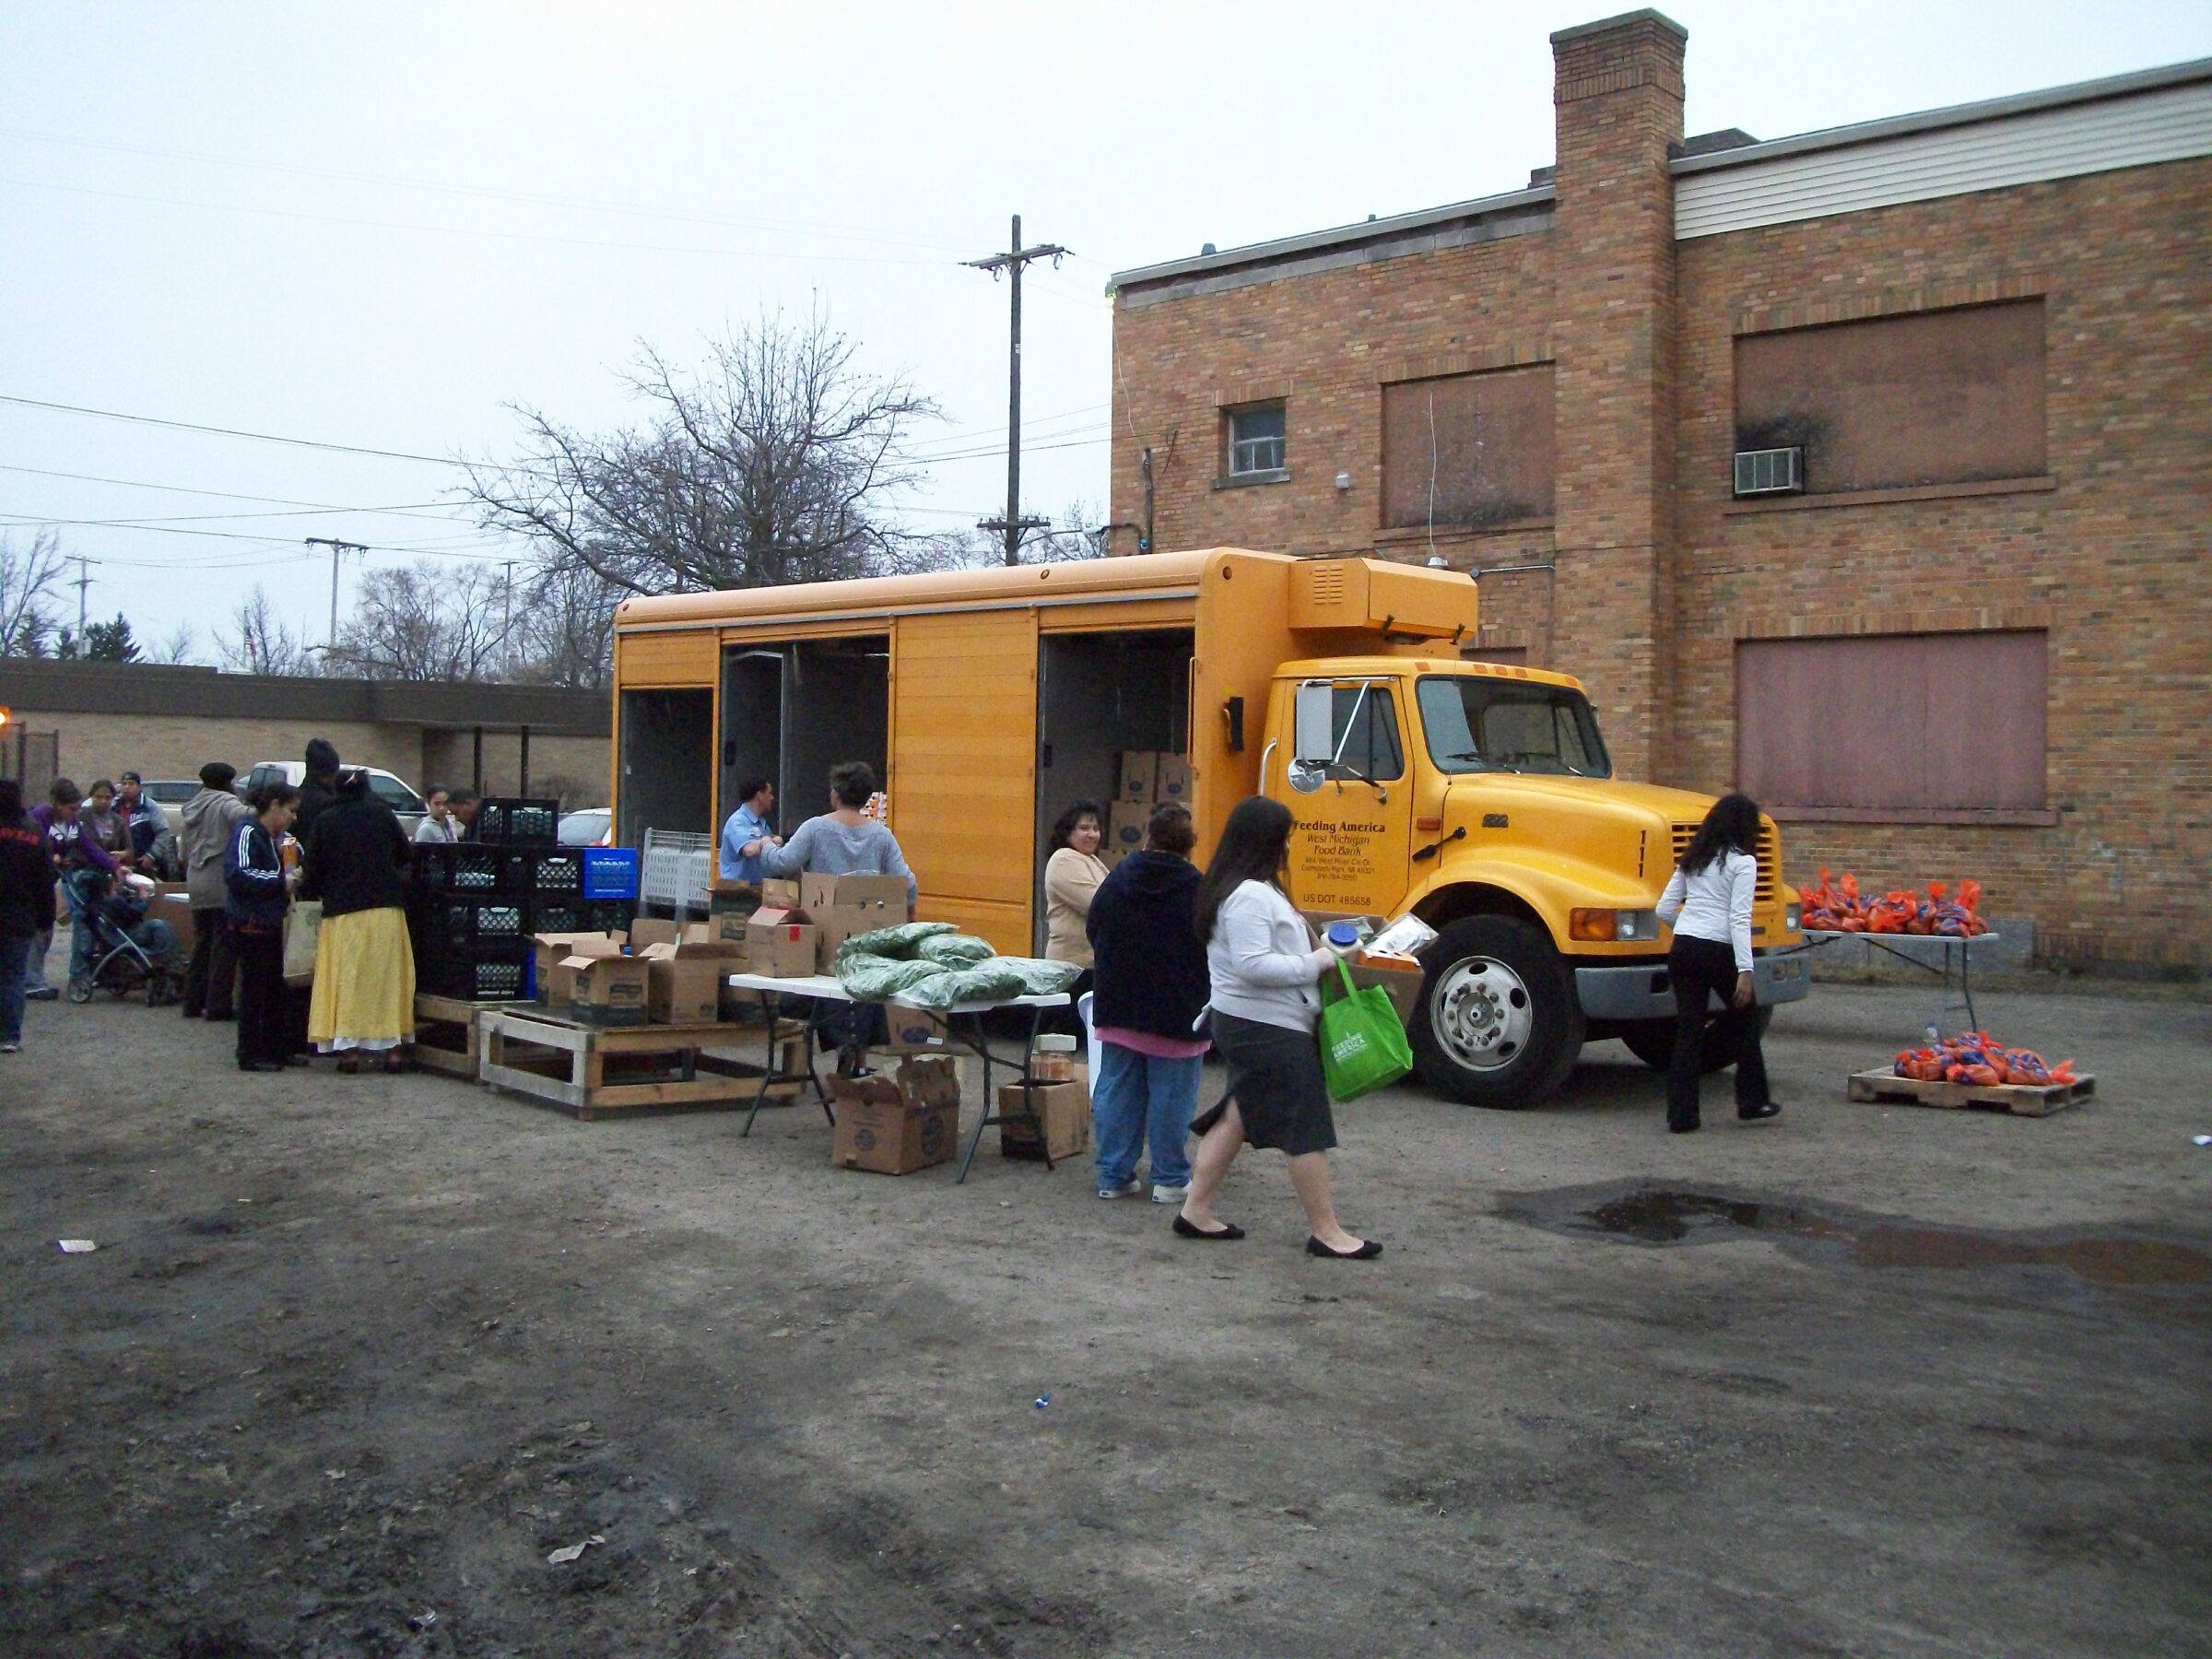 A Mobile Food Pantry in a yellow truck, nicknamed "The Bus", at Missionary Church of Christ in Grand Rapids.